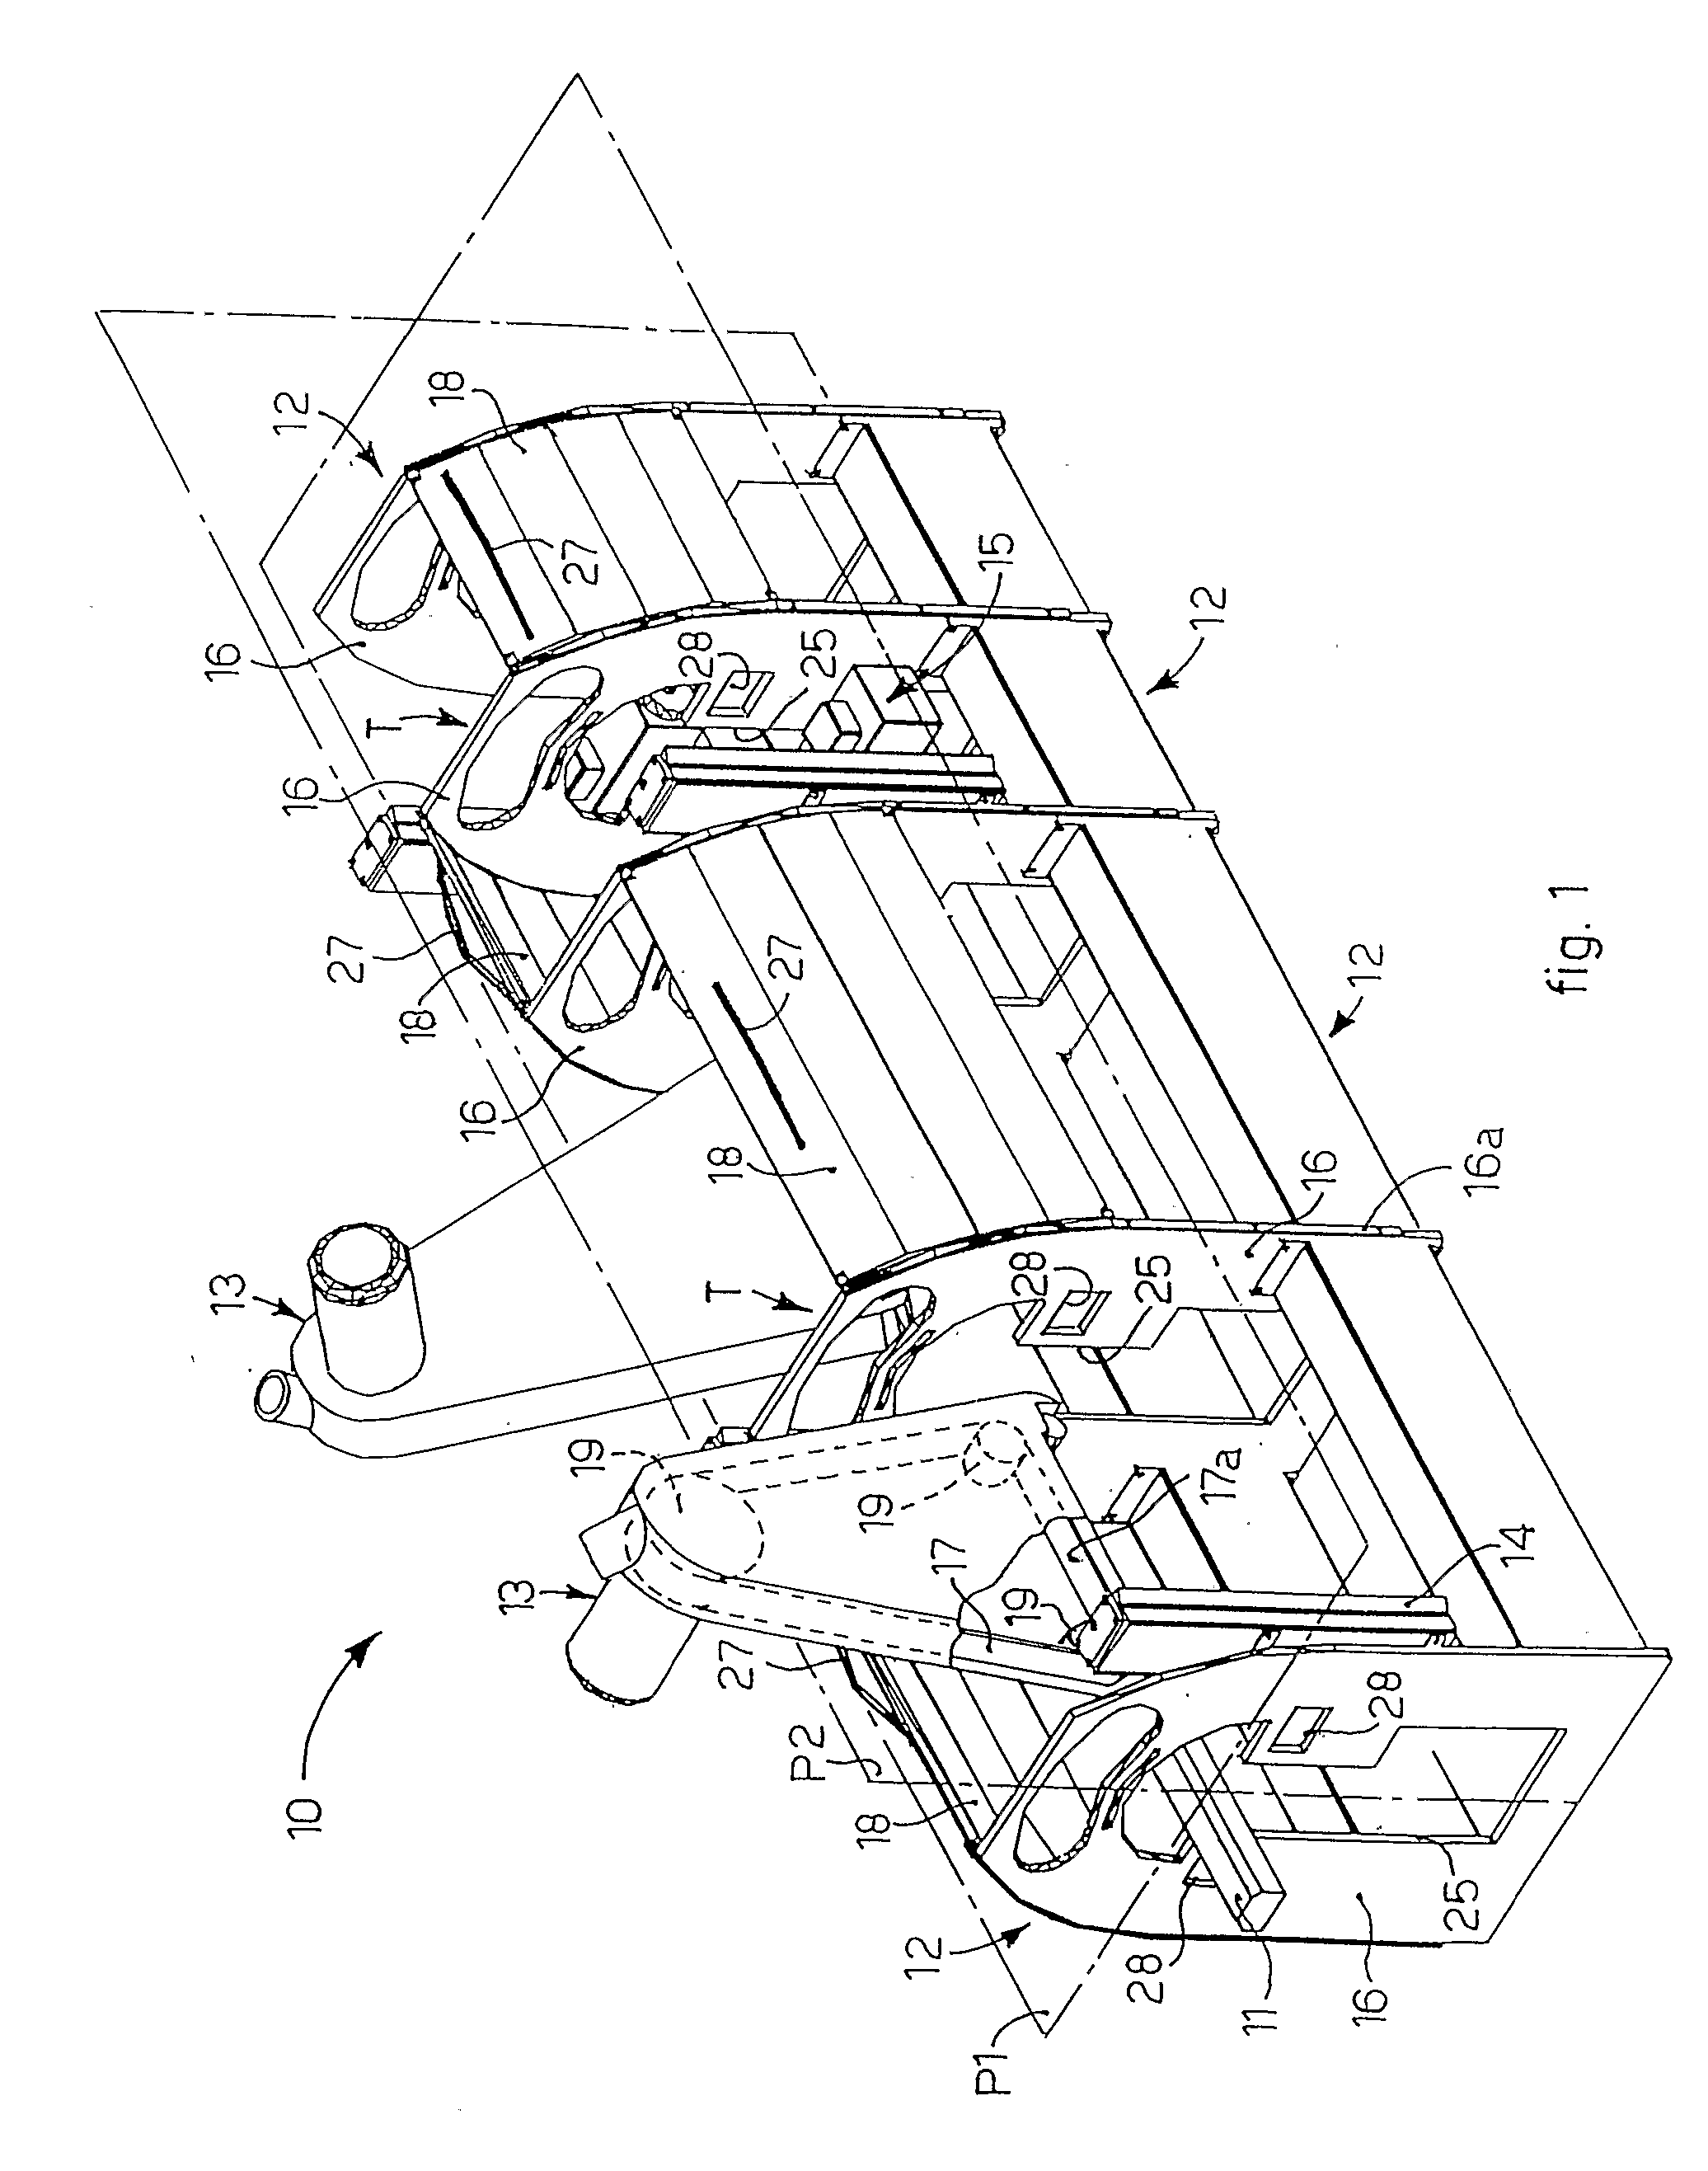 Machine for Finishing an Object Such as a Profiled Element, a Panel, or Suchlike